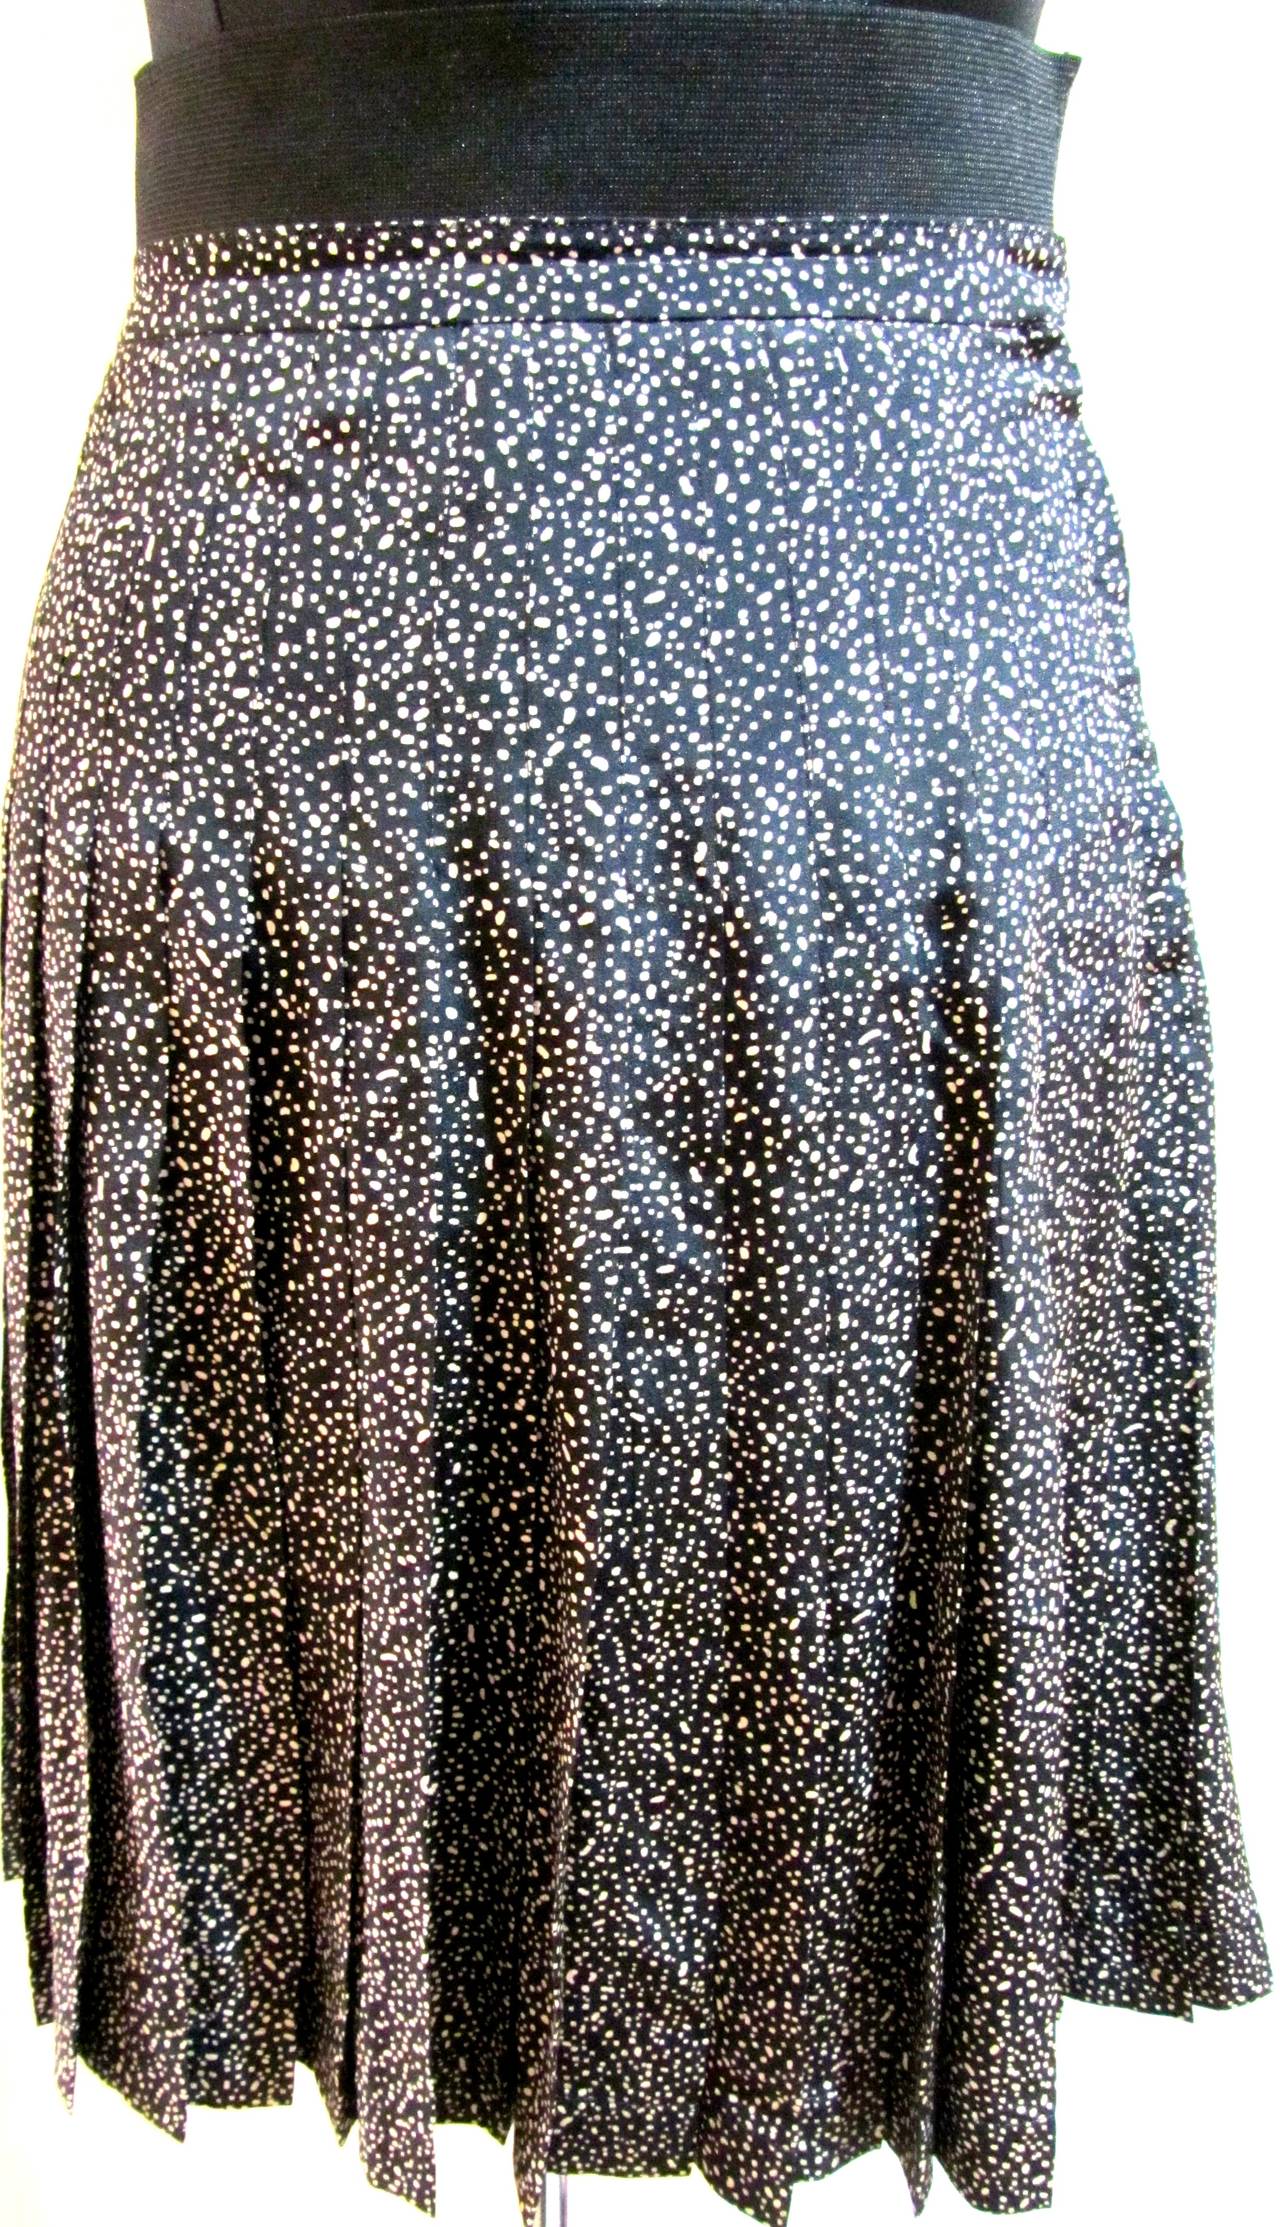 Chanel Silk Suit - Black and Cream Fabric with Iconic Lion Buttons - 1970's In Excellent Condition For Sale In Boca Raton, FL